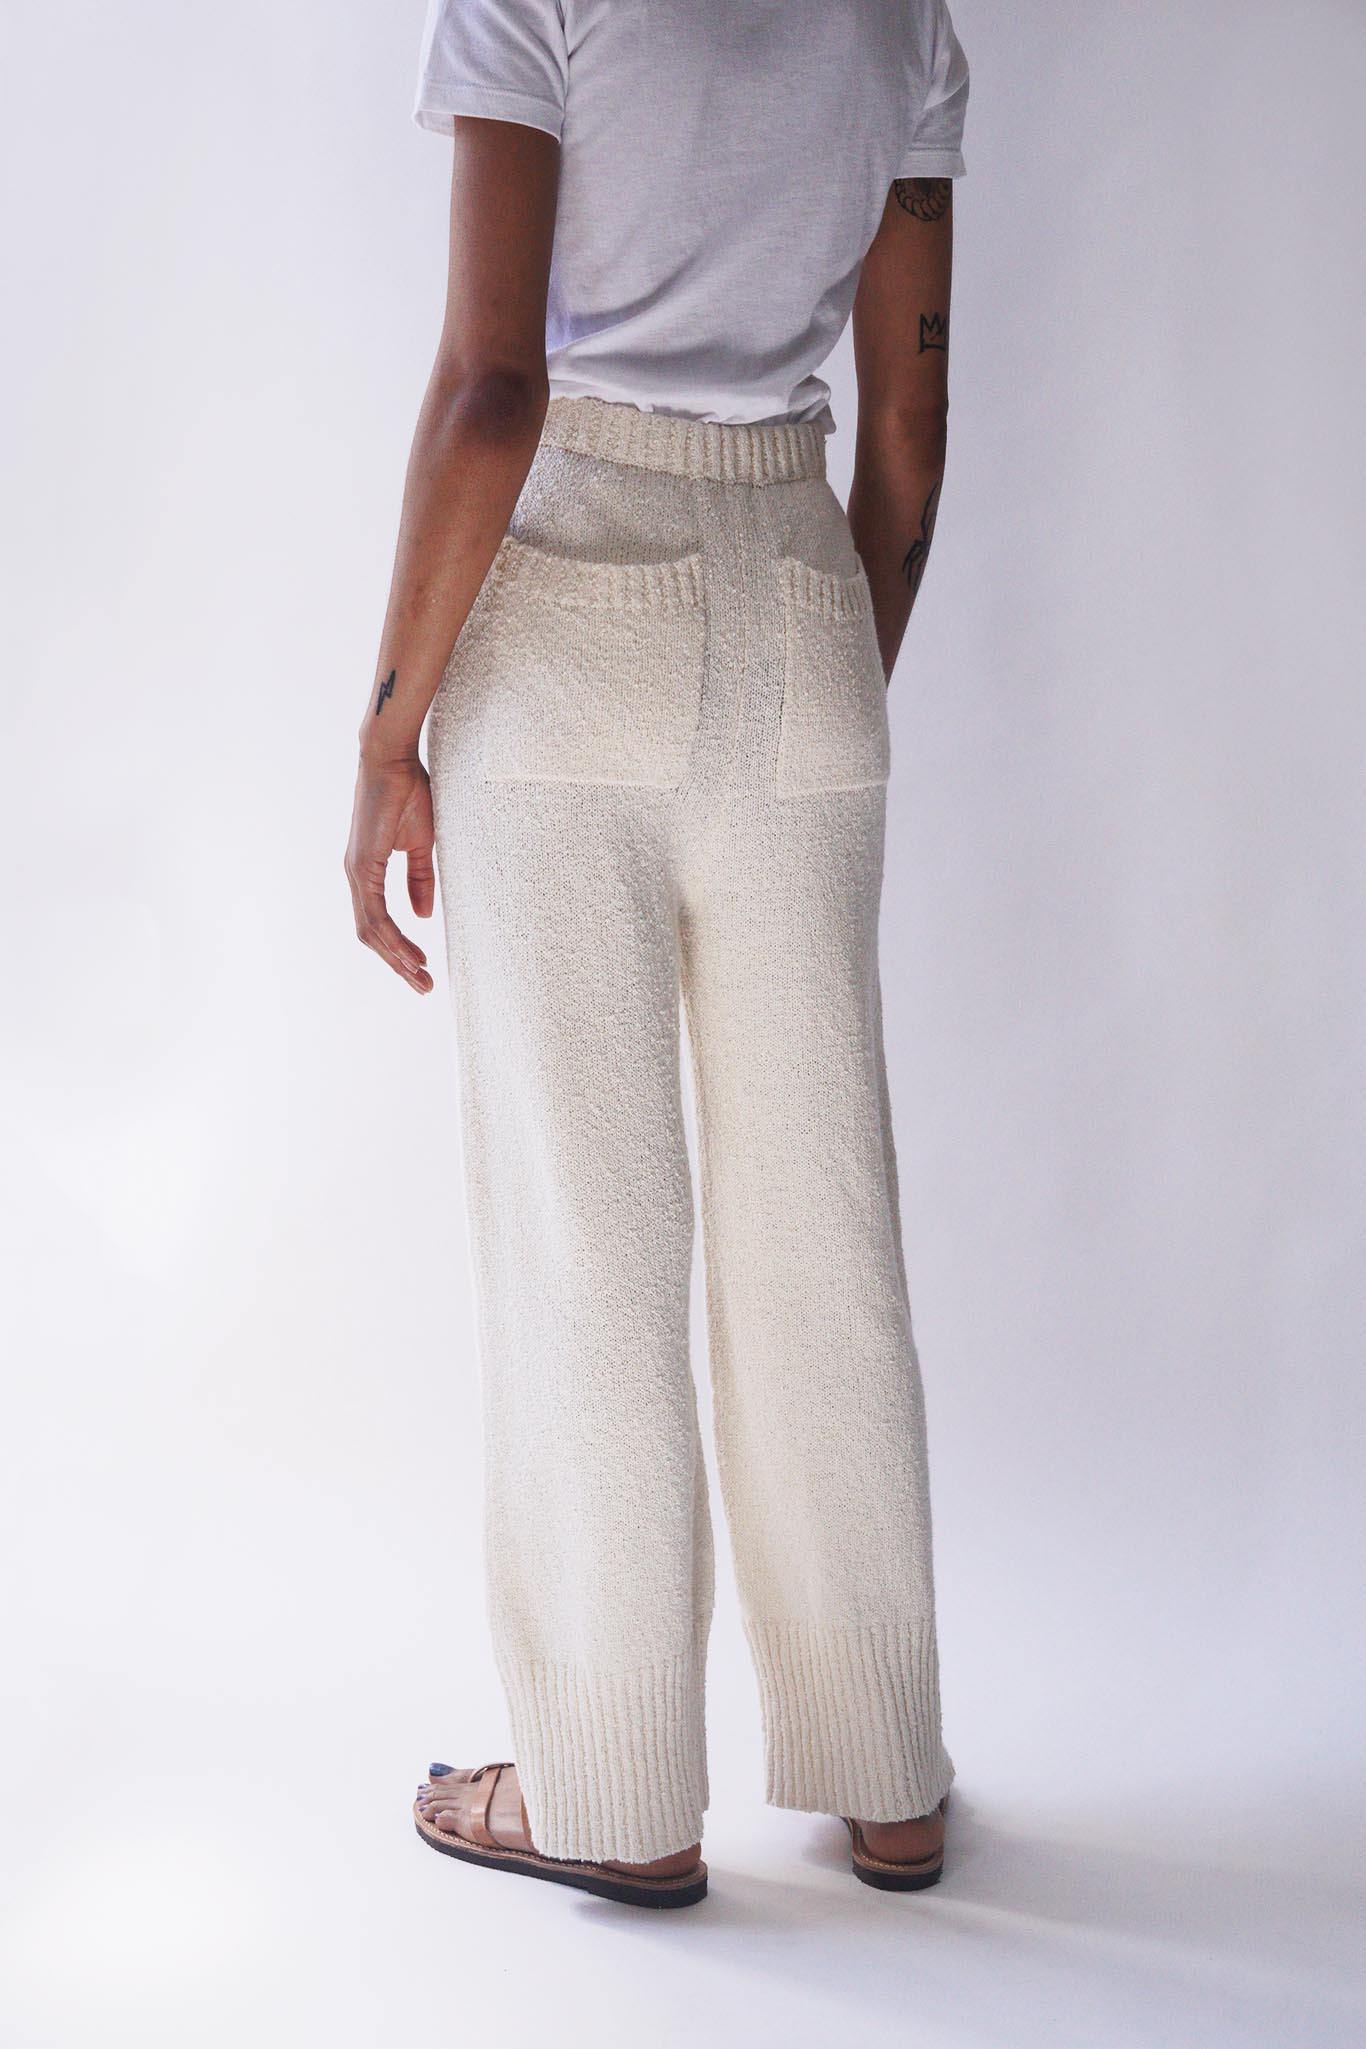 Organic cotton handmade knit pant trousers. Made in Peru. Brooklyn Style.